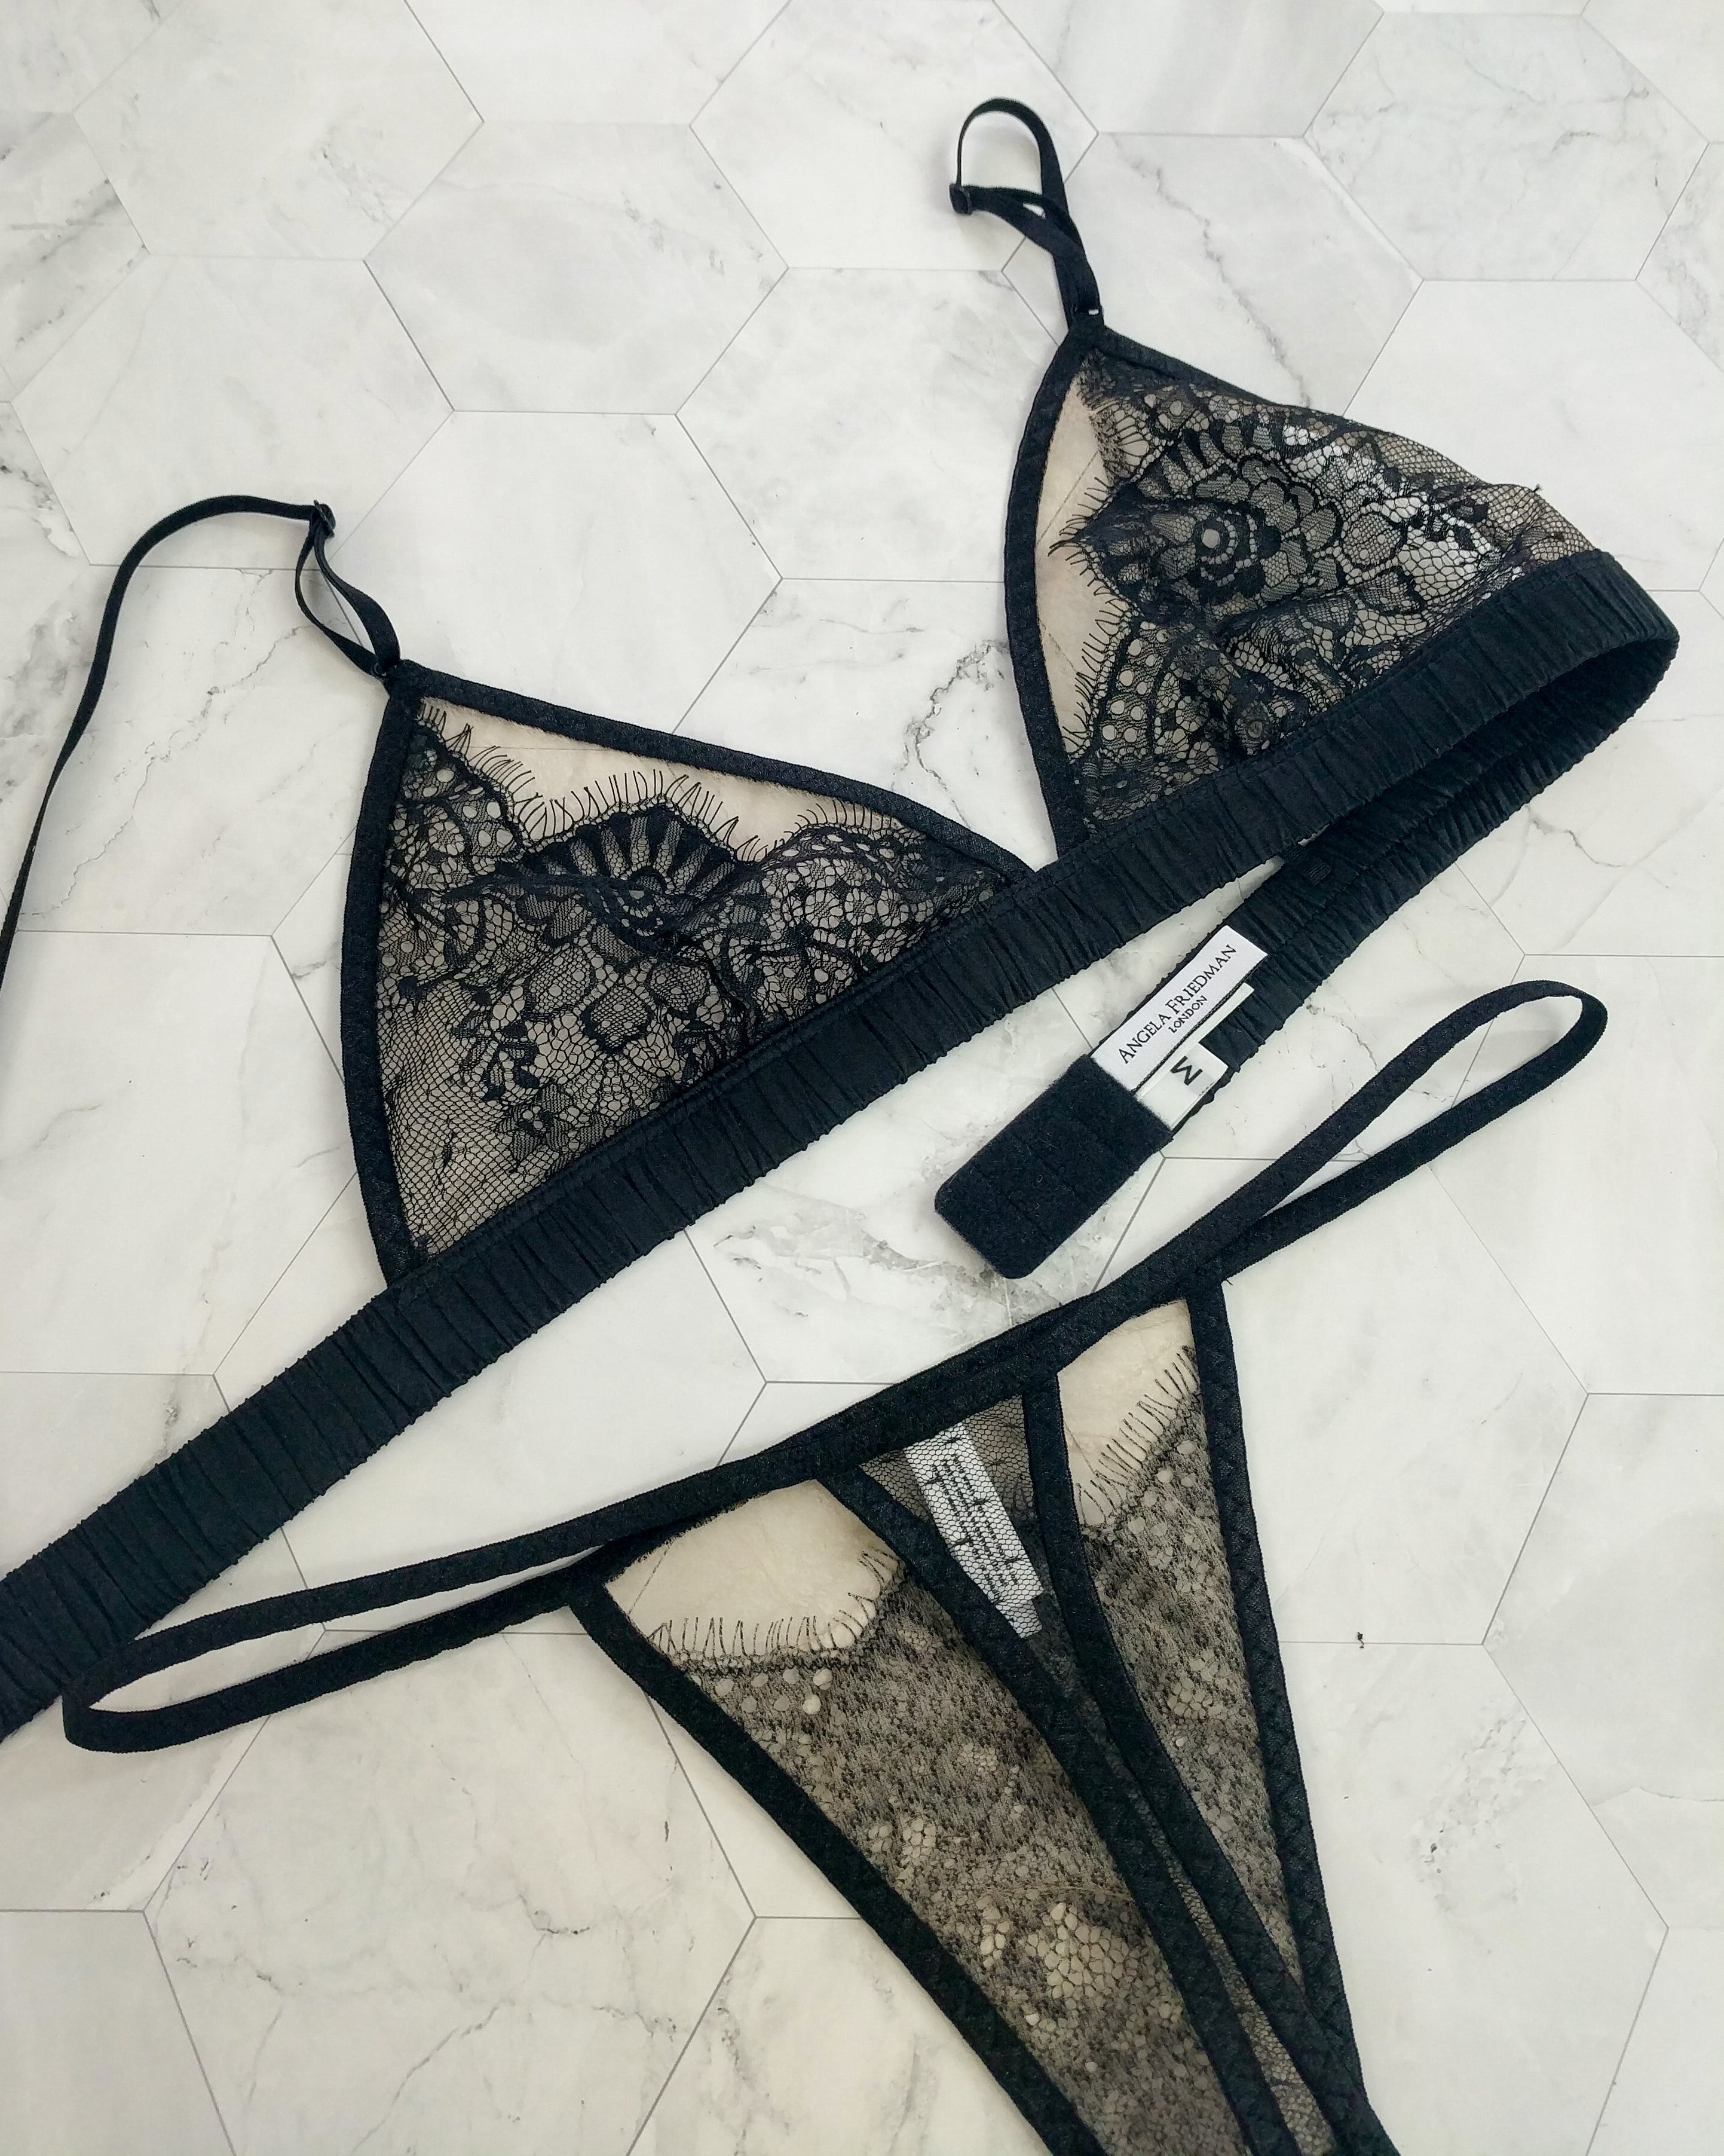 Handmade lingerie set in black lace with a thong and black bra